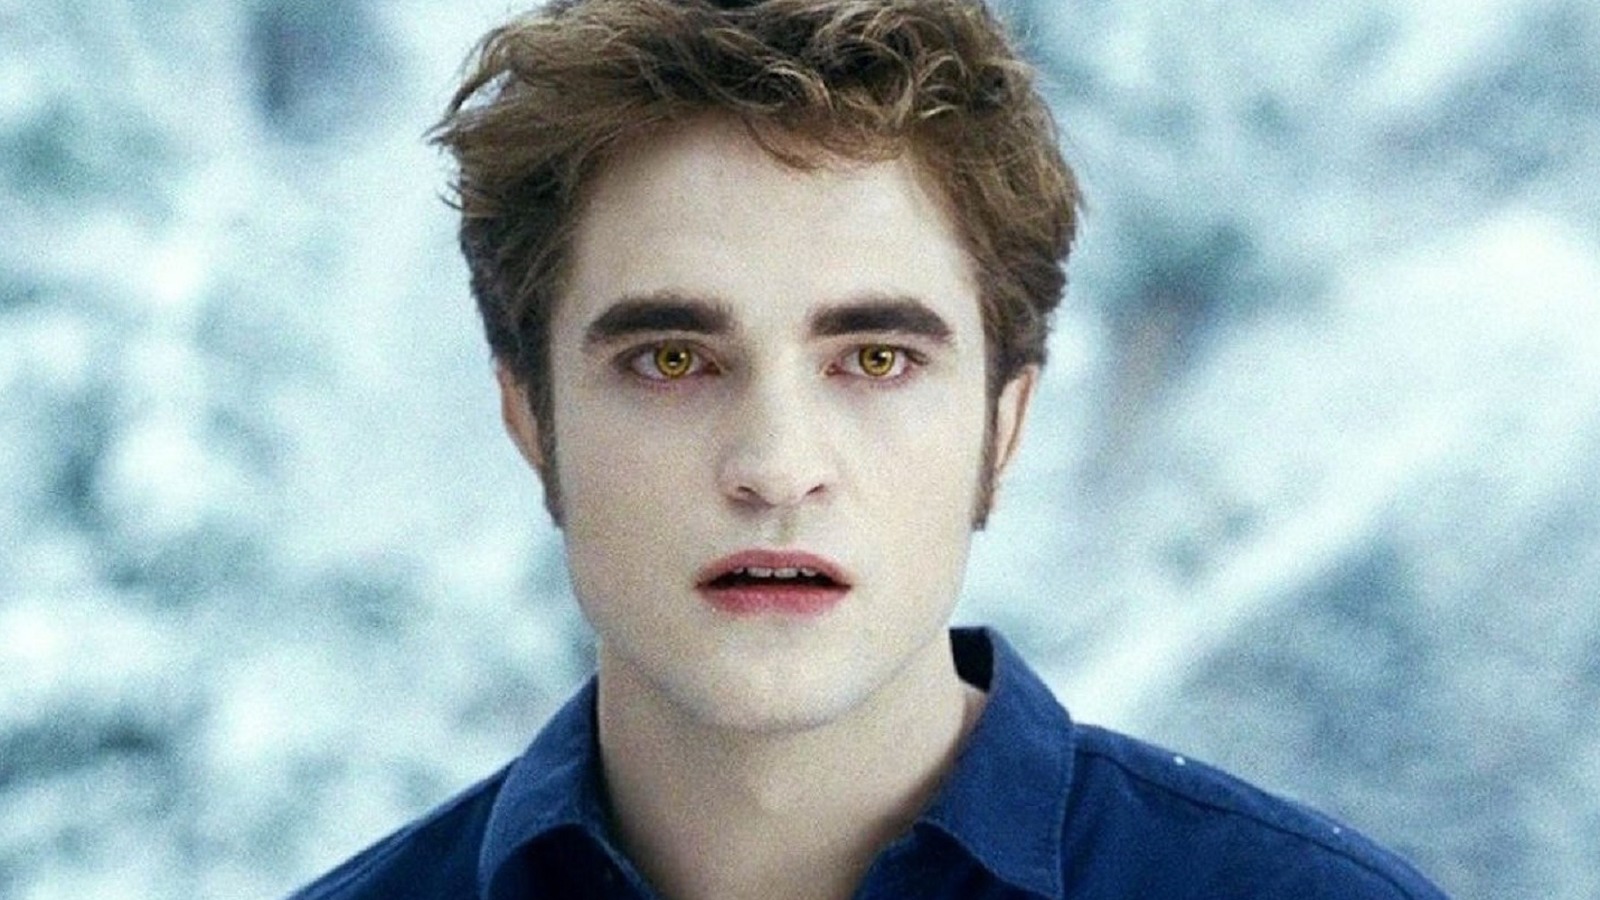 Edward cullen real name